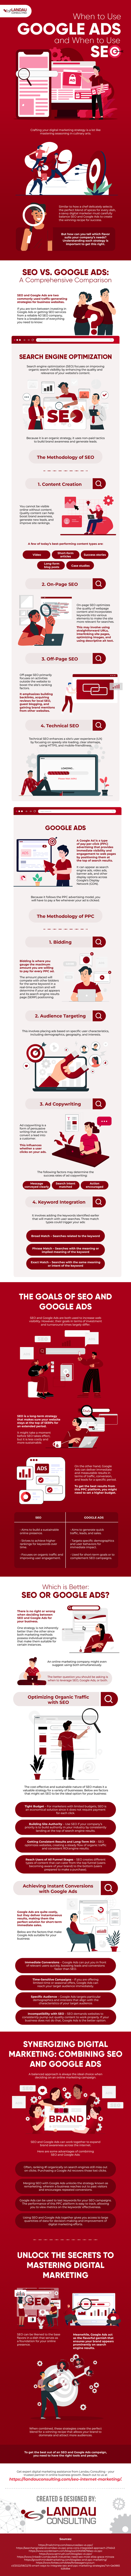 When to Use Google Ads and When to Use SEO Infographic Image 06